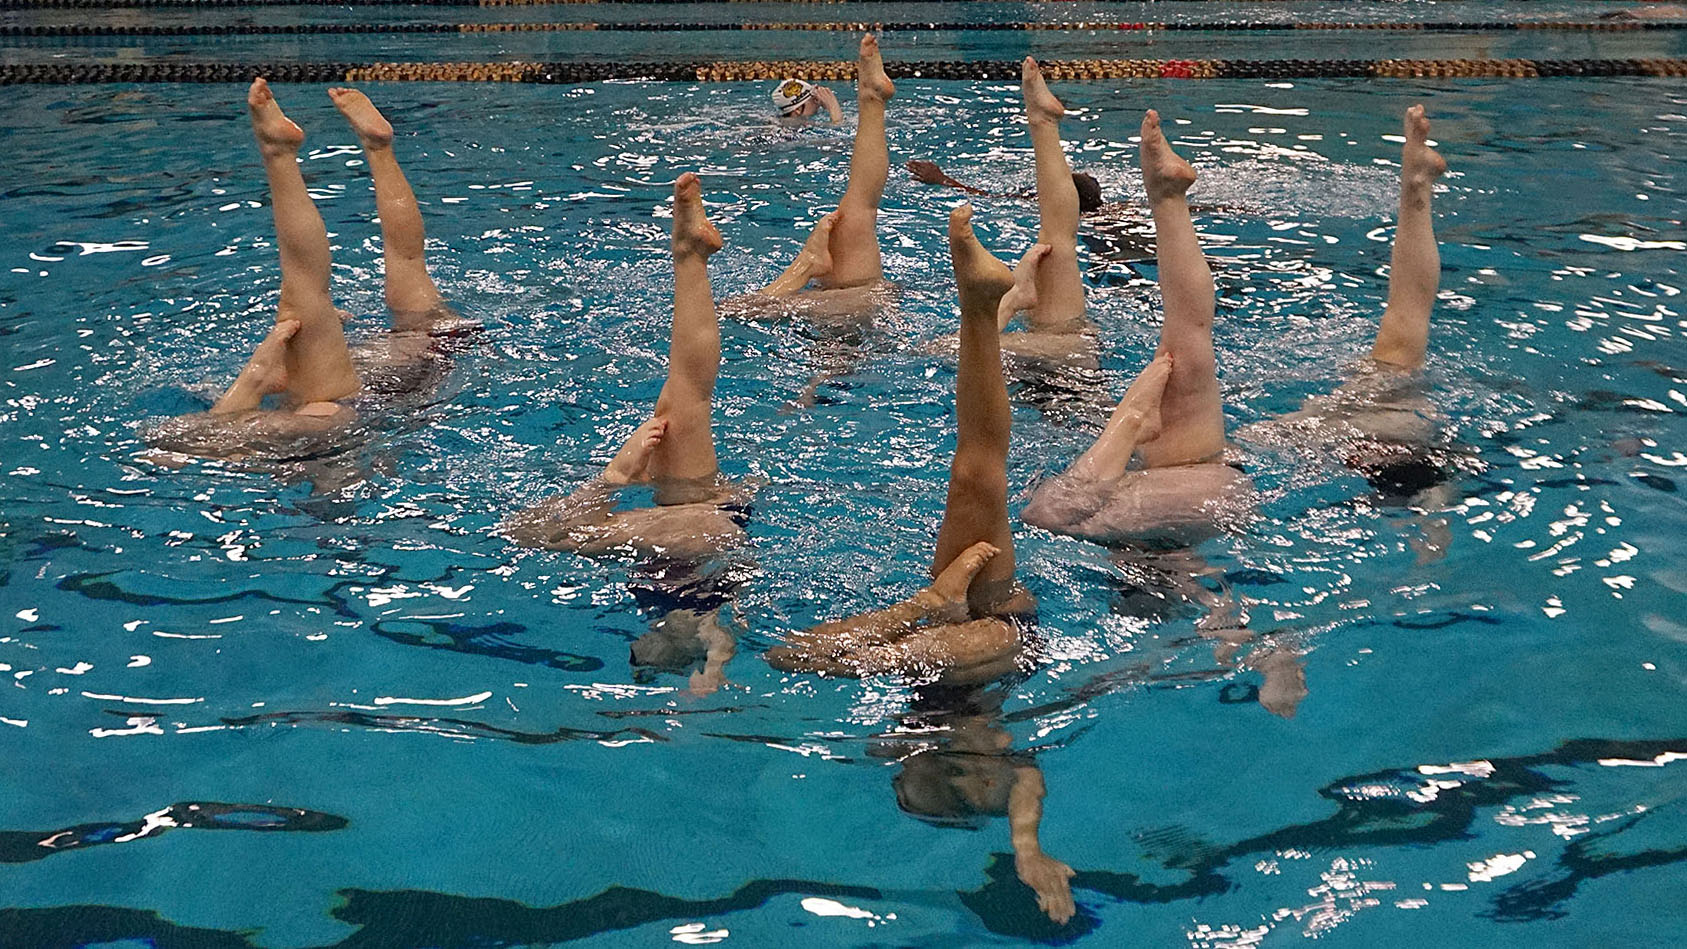 Dalhousie's synchronized swimming team holds a bent-knee position.